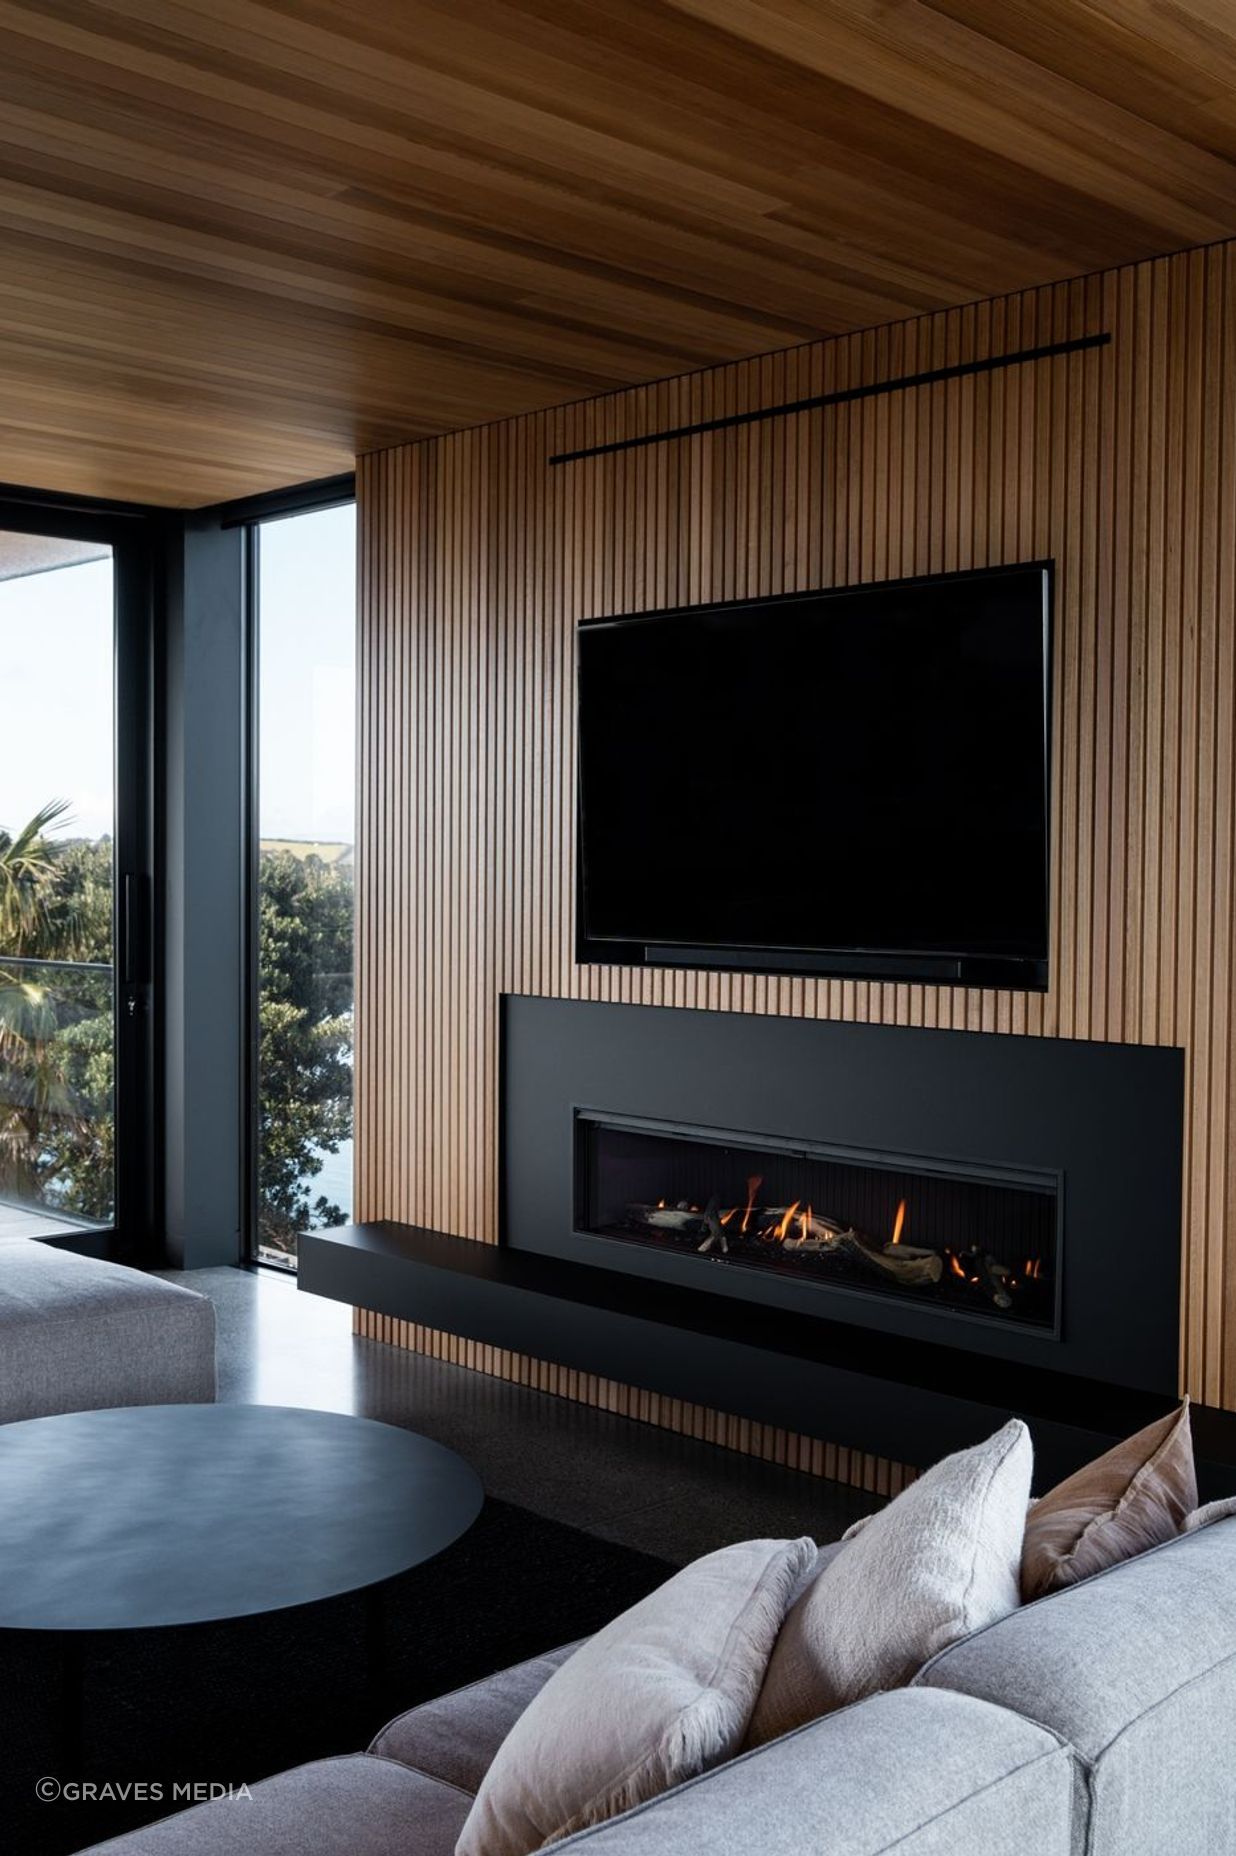 The living area centres around the elegant fireplace, sophistically surrounded by matte-black Fenix and oak paneling.